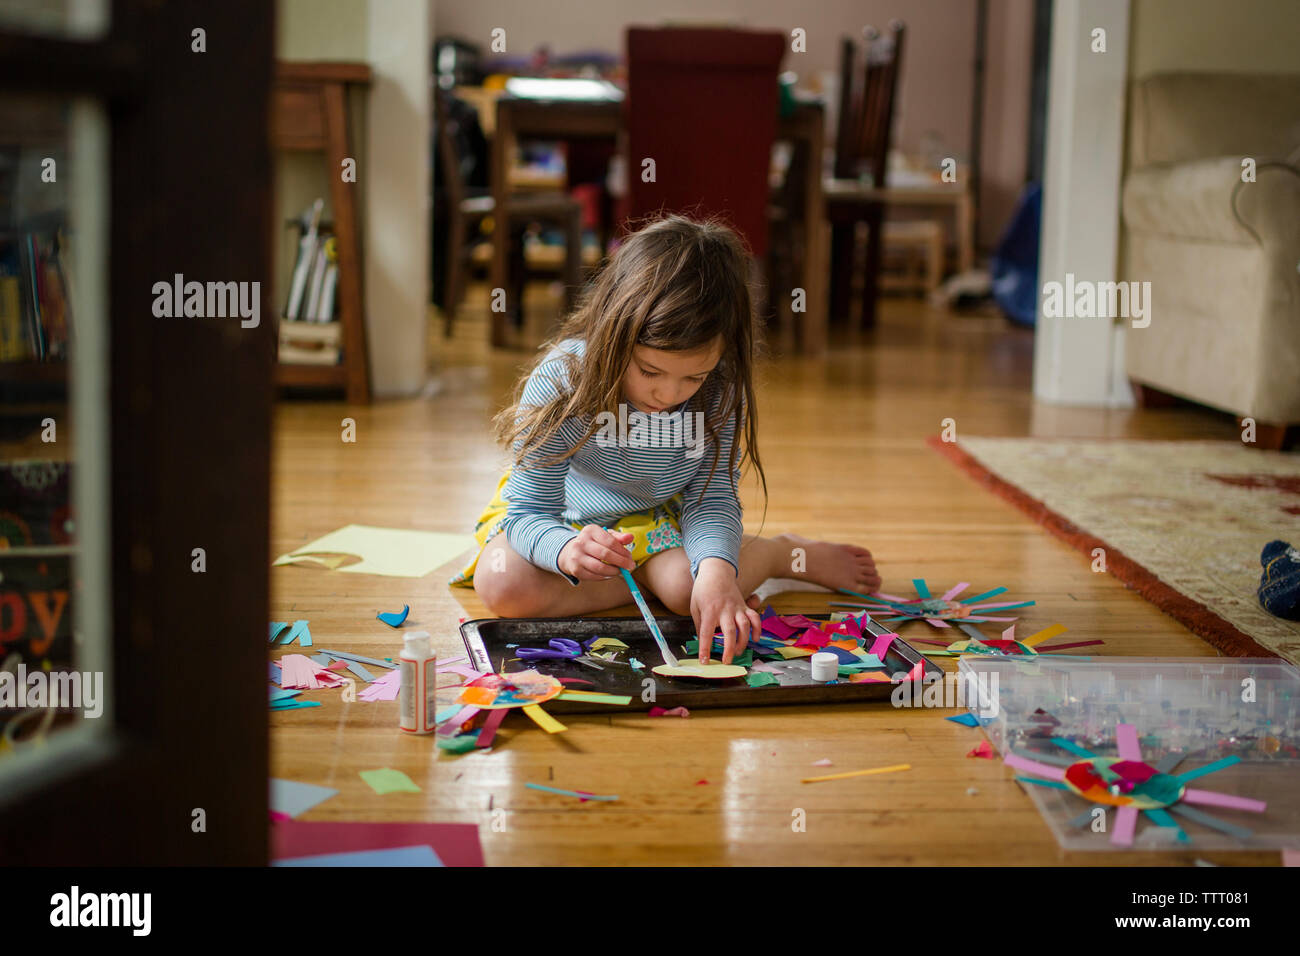 Looking through doorway at little girl sitting on floor crafting paper Stock Photo